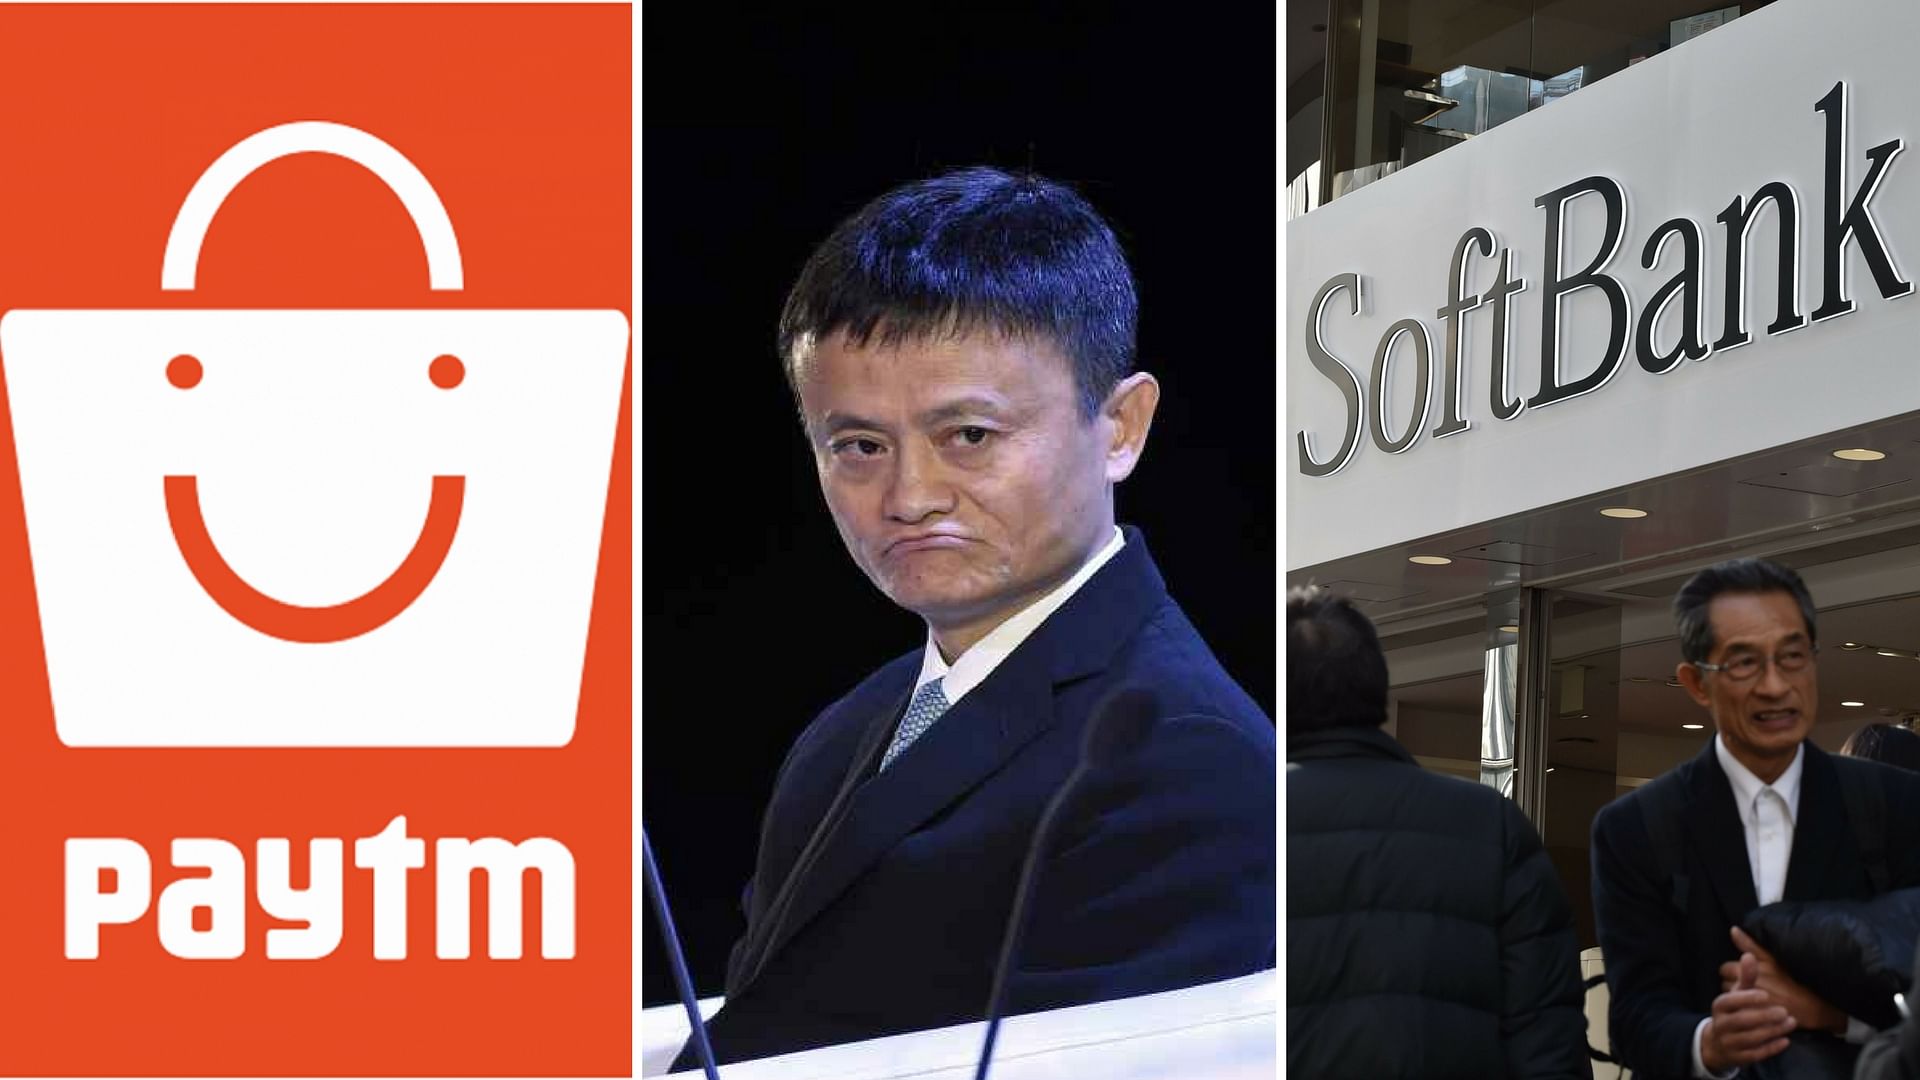 About USD 45 million (about Rs 292.5 crore) has been pumped in by Alibaba.com Singapore E-commerce, it added.